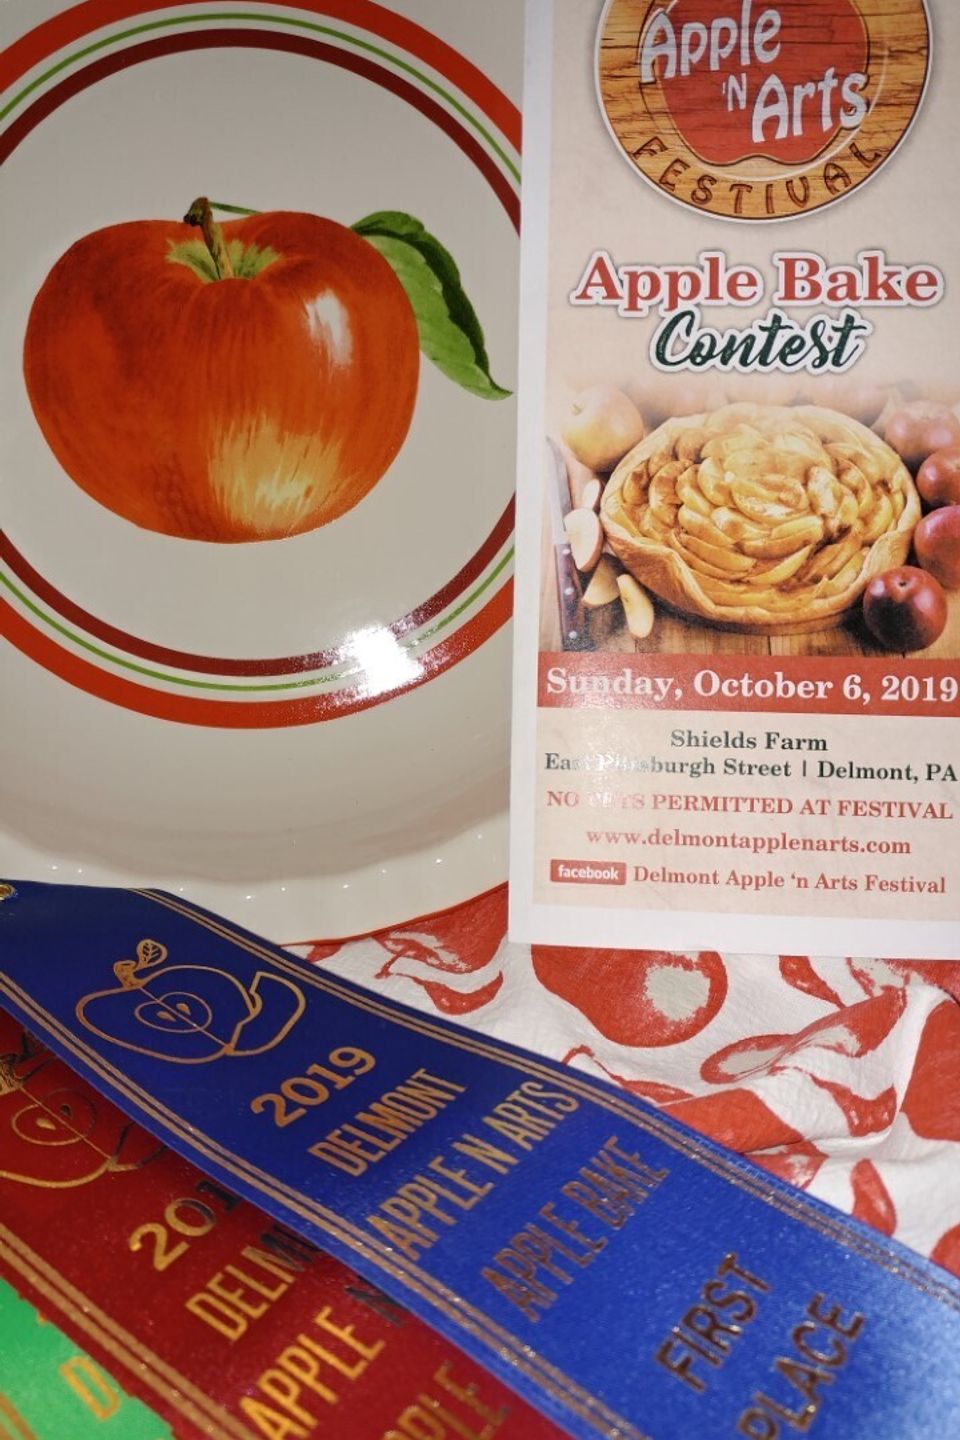 Apple bake contest two